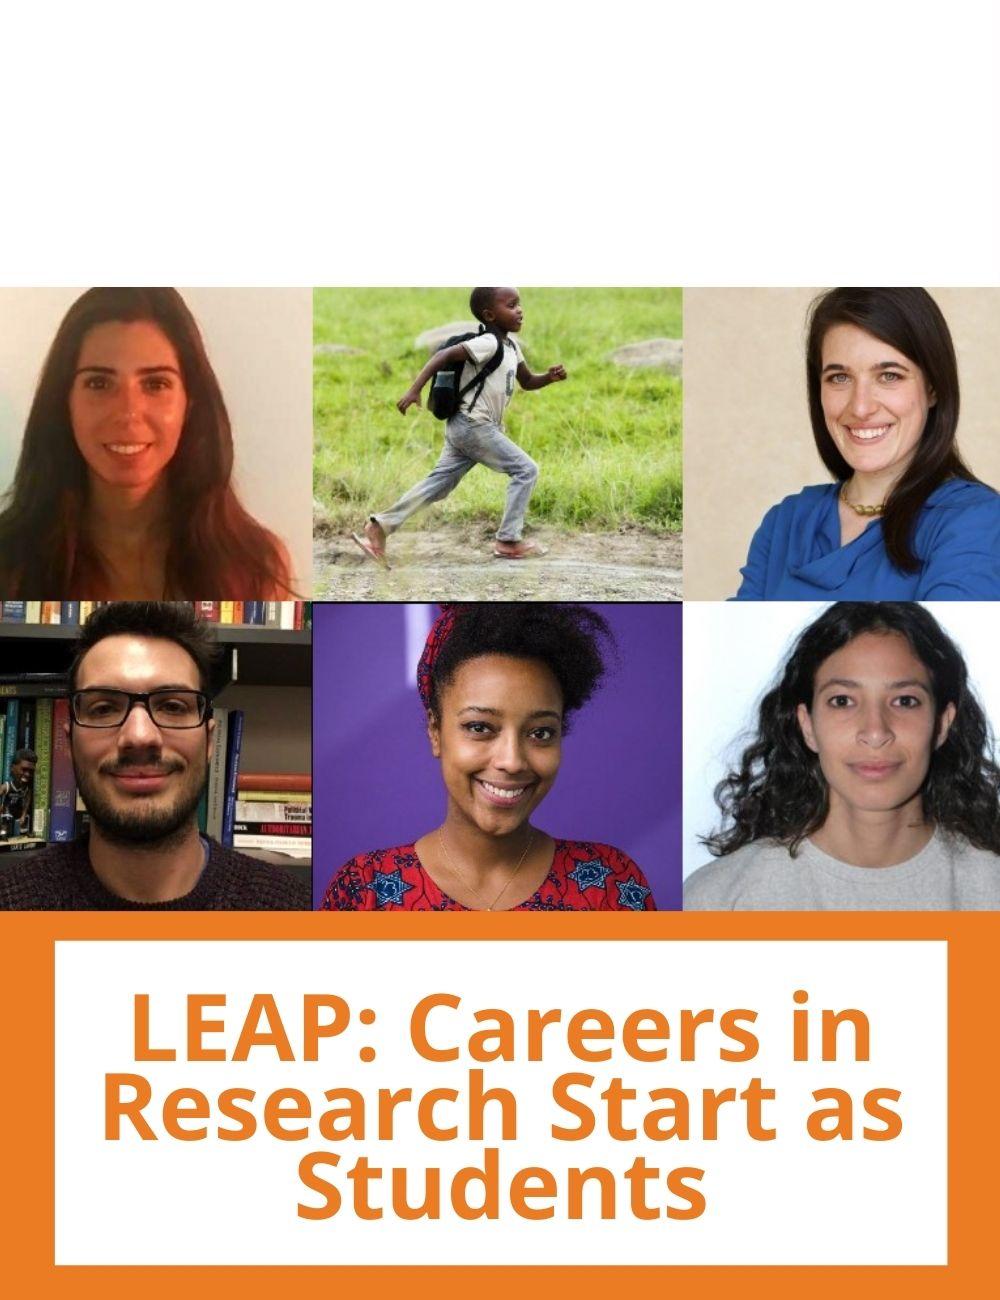 Link to related stories. Image: 6 LEAP students. Story headline: LEAP: Careers in Research Start as Students